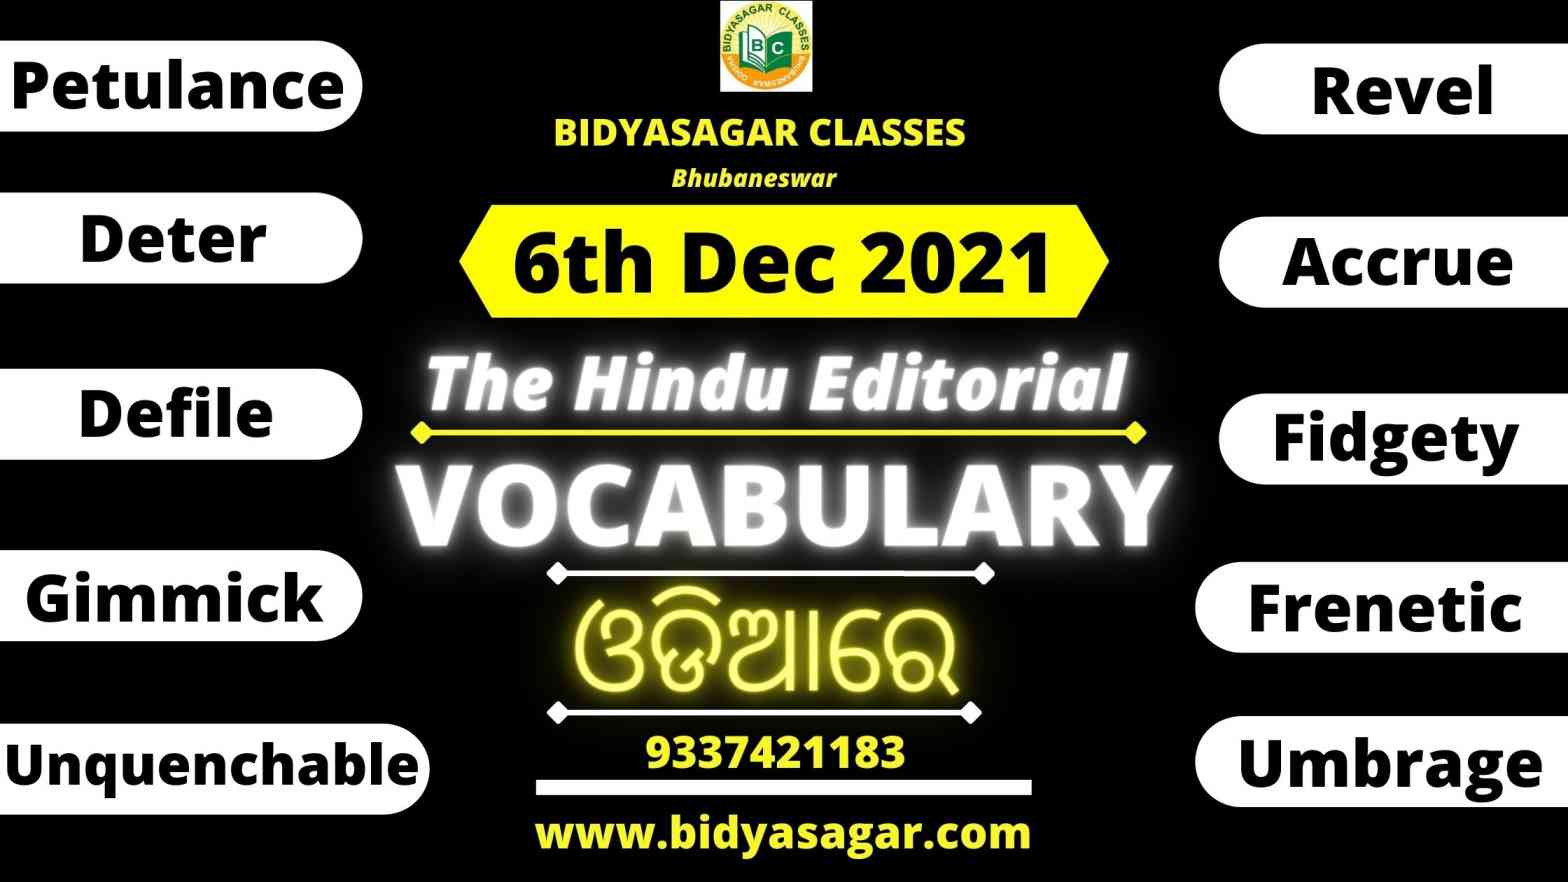 The Hindu Editorial Vocabulary of 6th December 2021